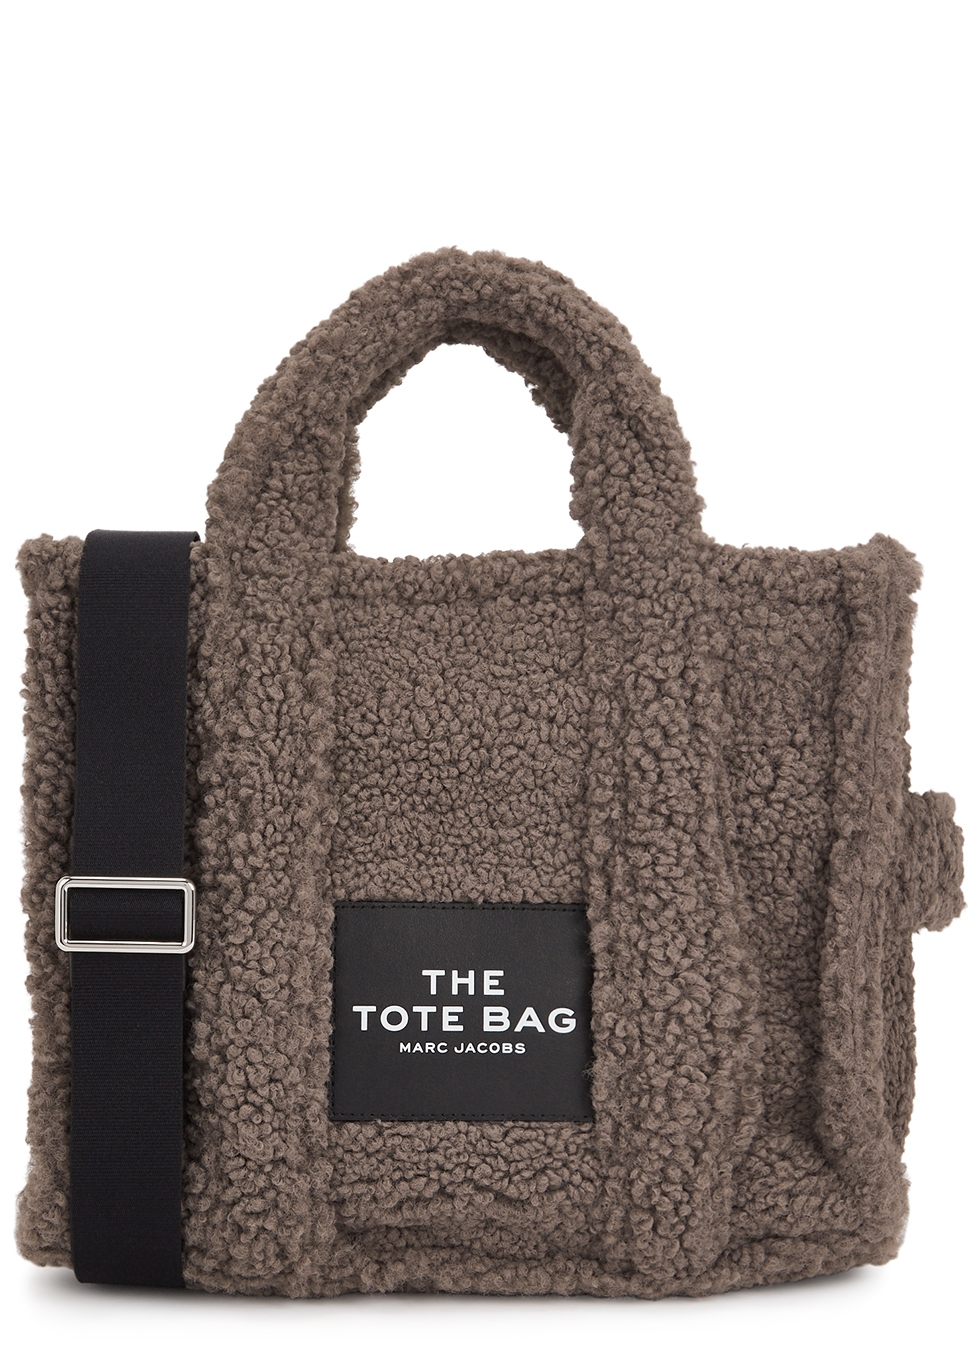 The Teddy Traveller Tote small faux shearling bag